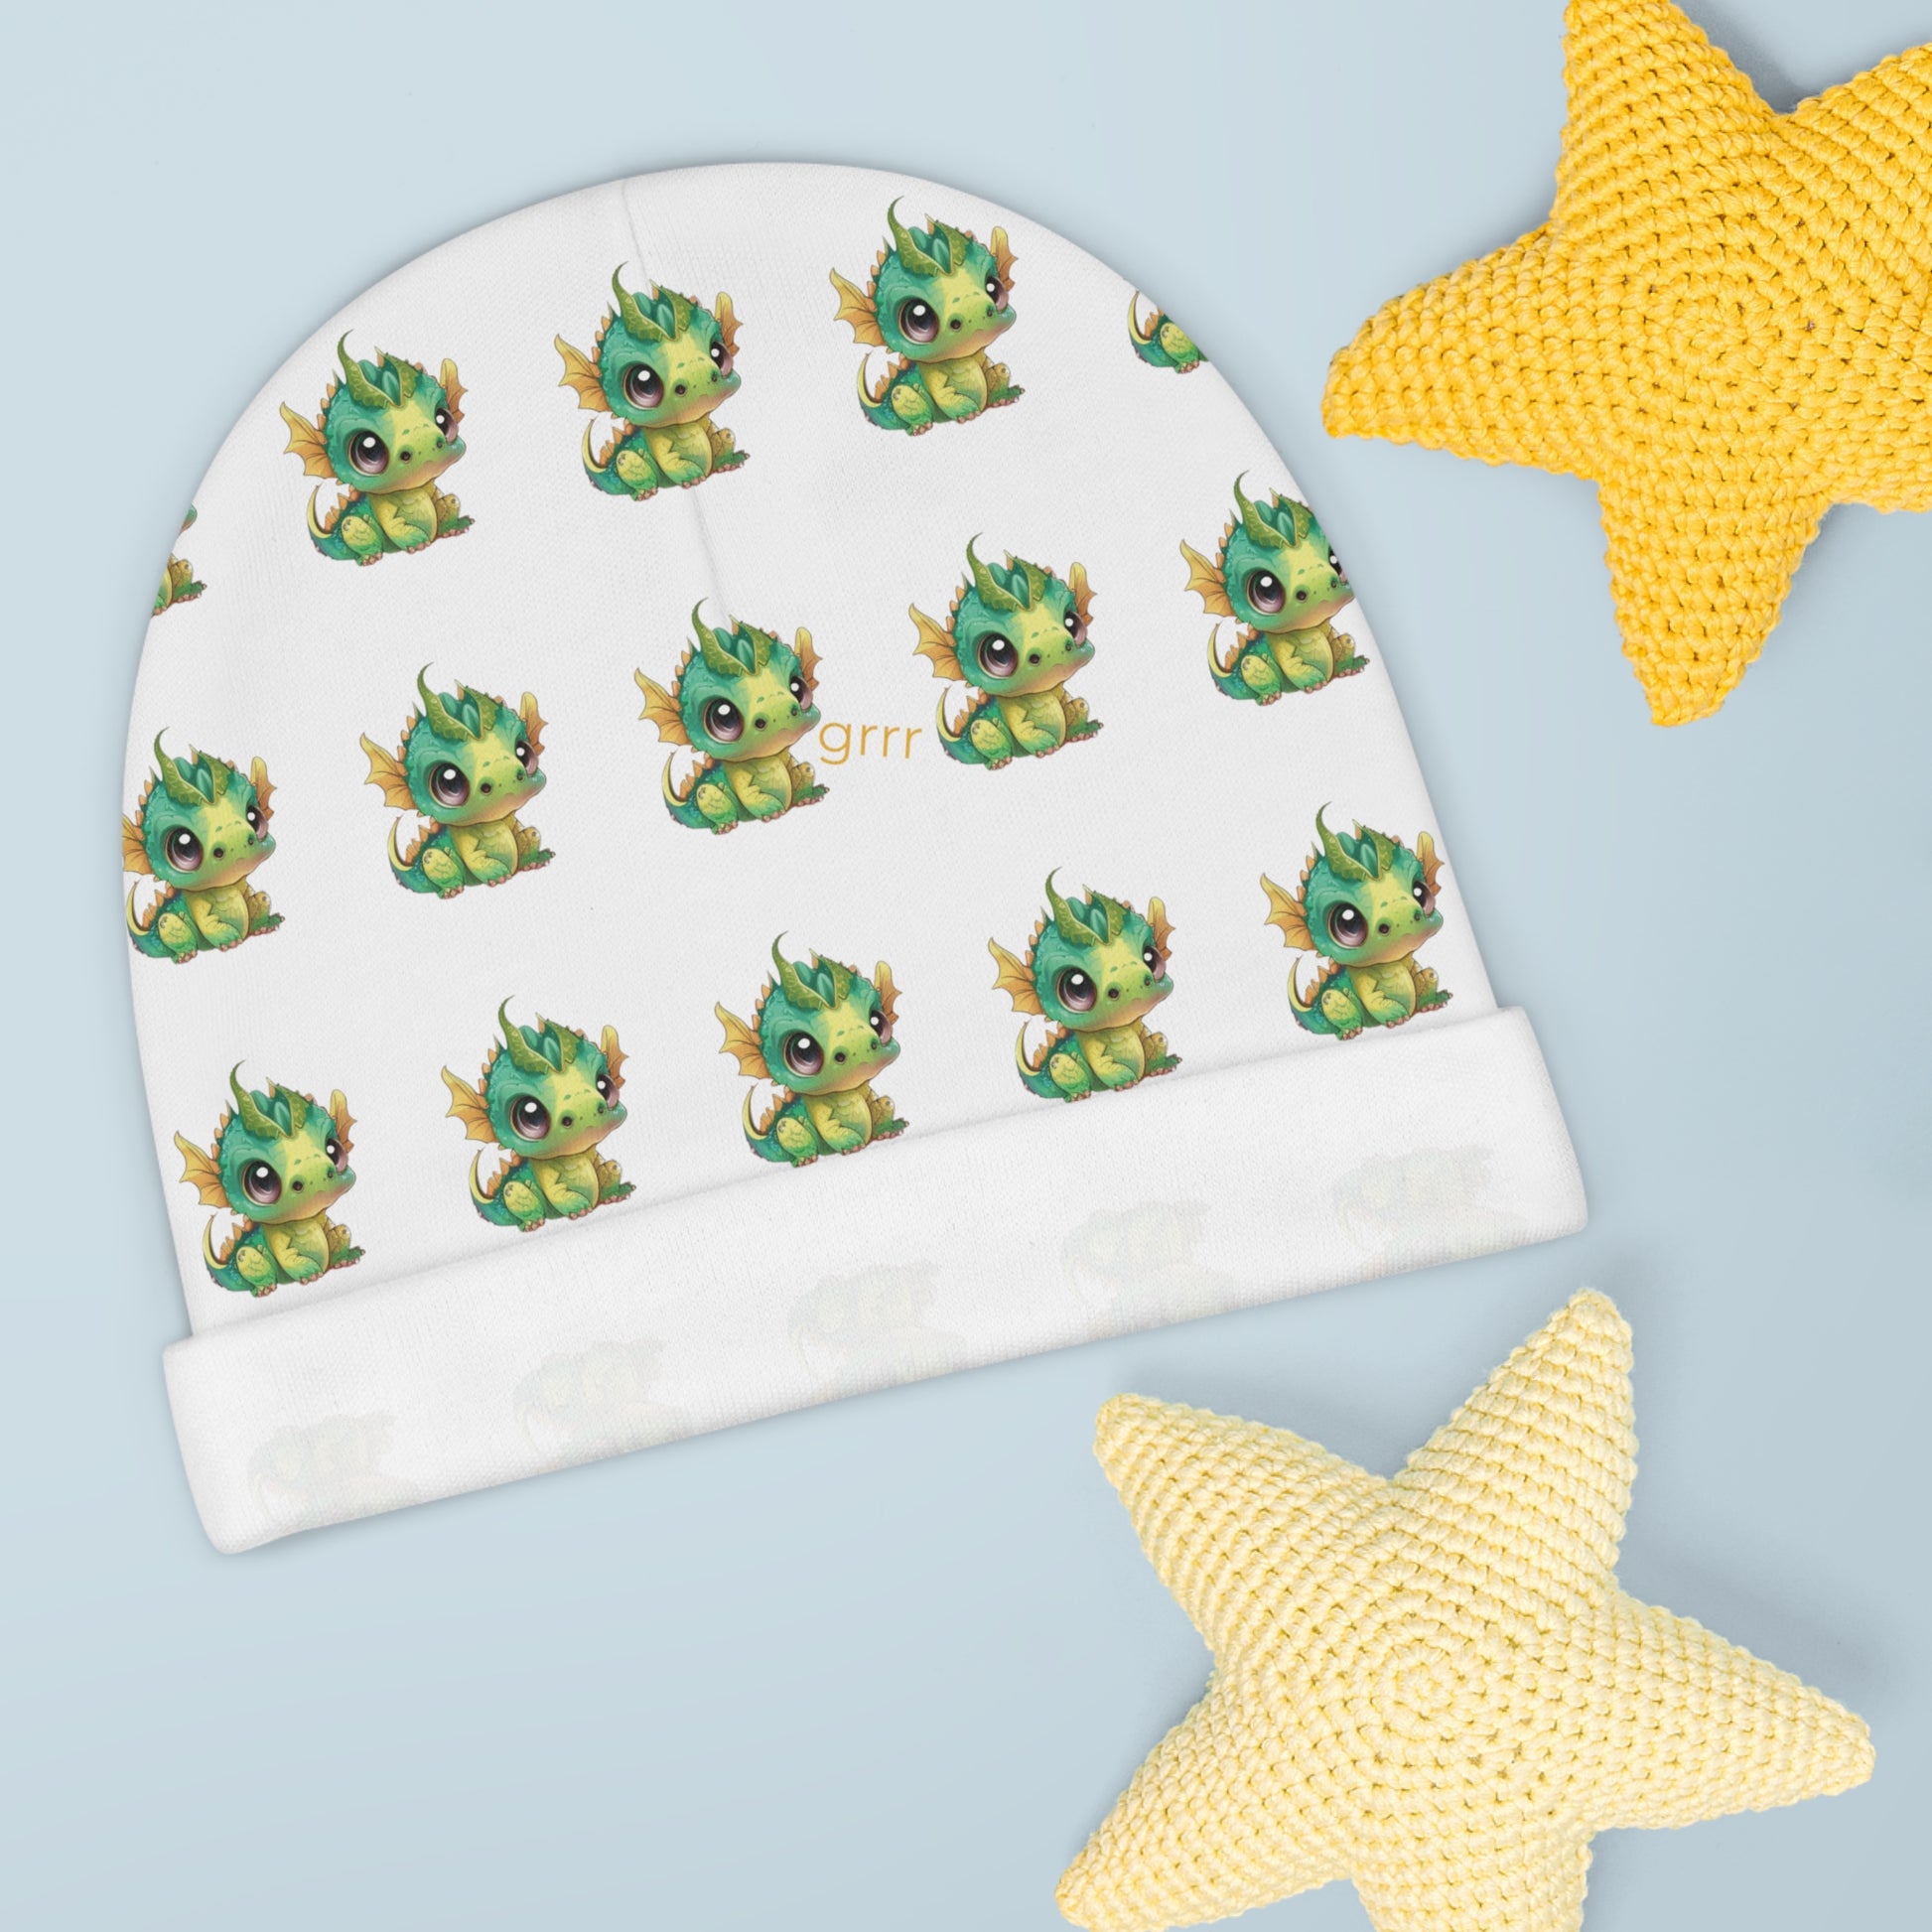 A darling baby beanie cap with green baby Bobby Dragons all over it - one little dragon is saying grrr - lol - so fun.